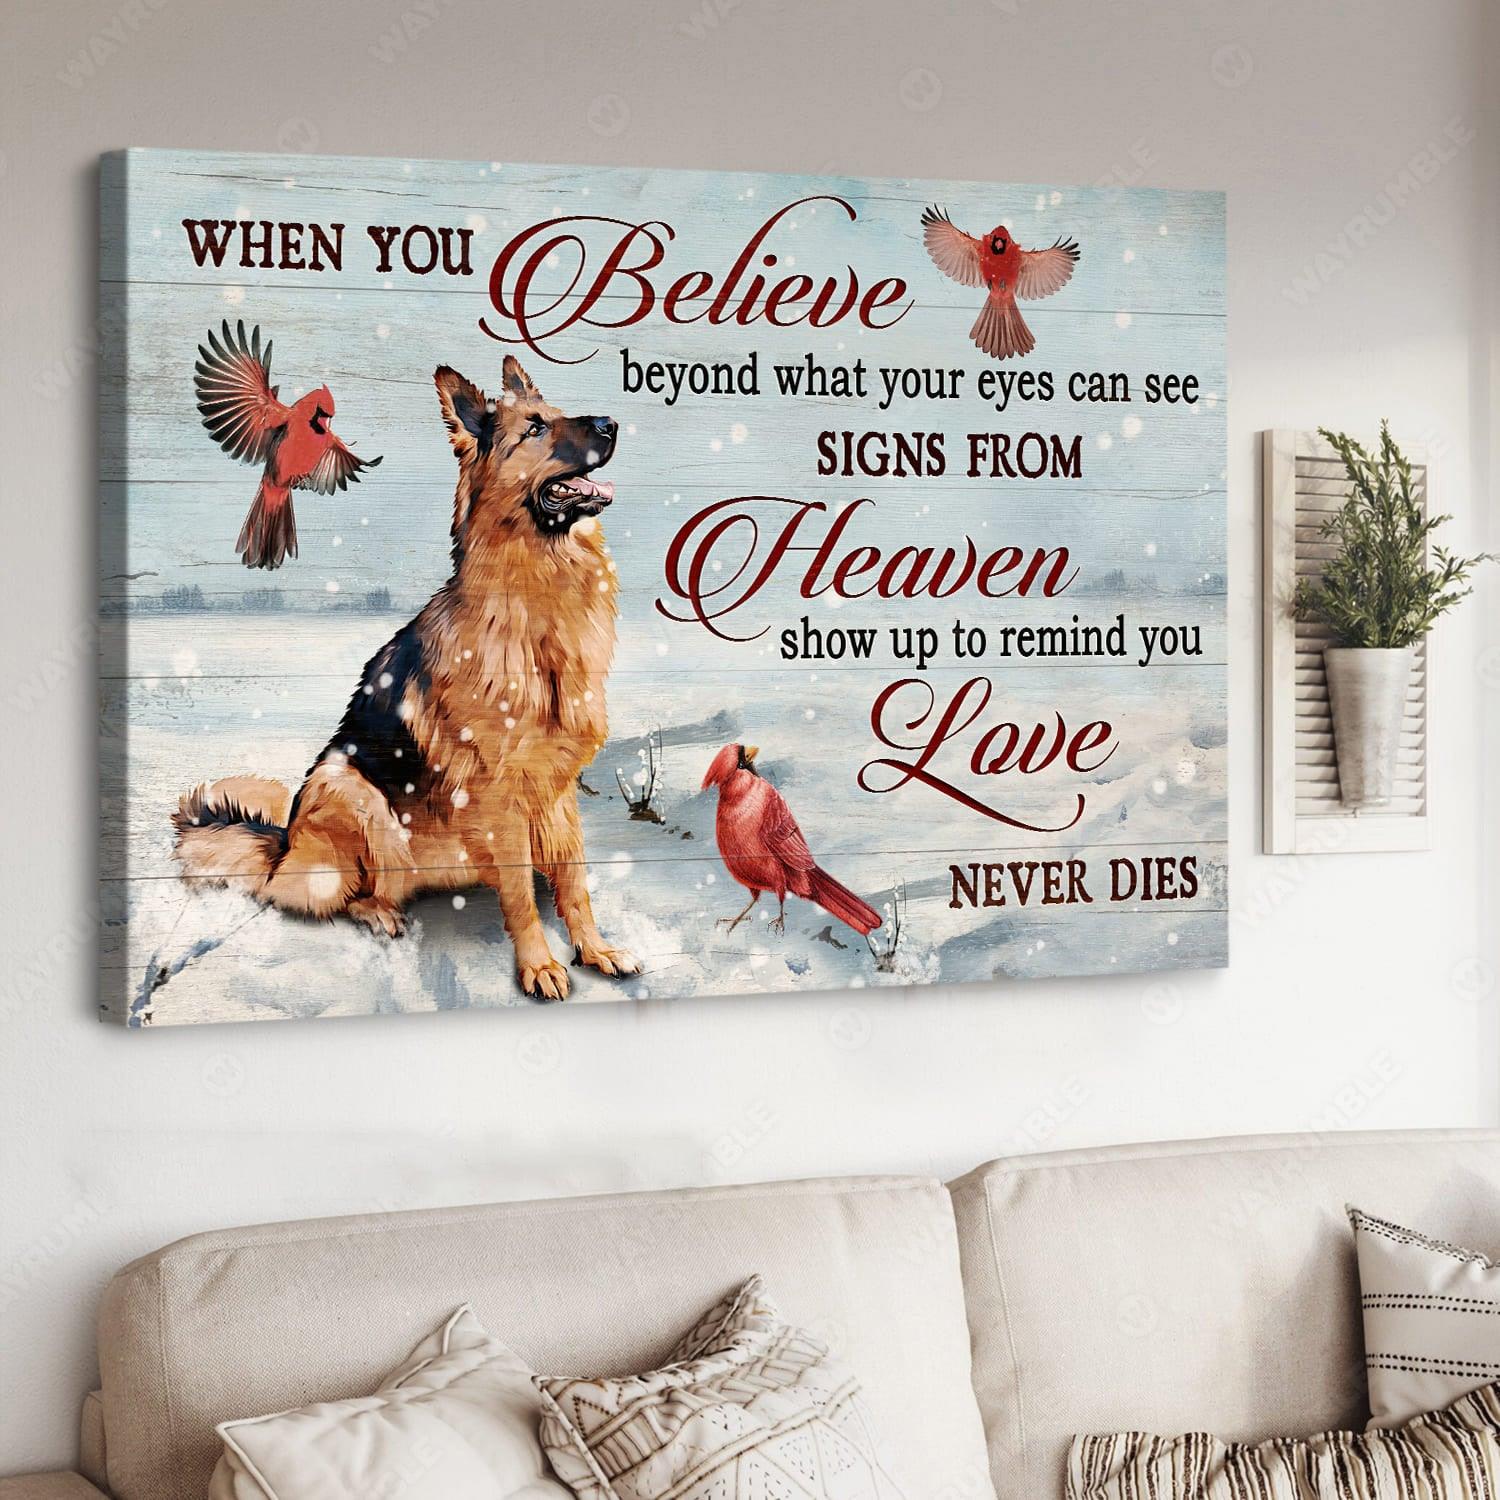 Memorial Premium Wrapped Landscape Canvas - German shepherd Dog, Red Cardinal, Snow, Signs From Heaven - Heaven Gifts For German Shepherd Lovers - Amzanimalsgift